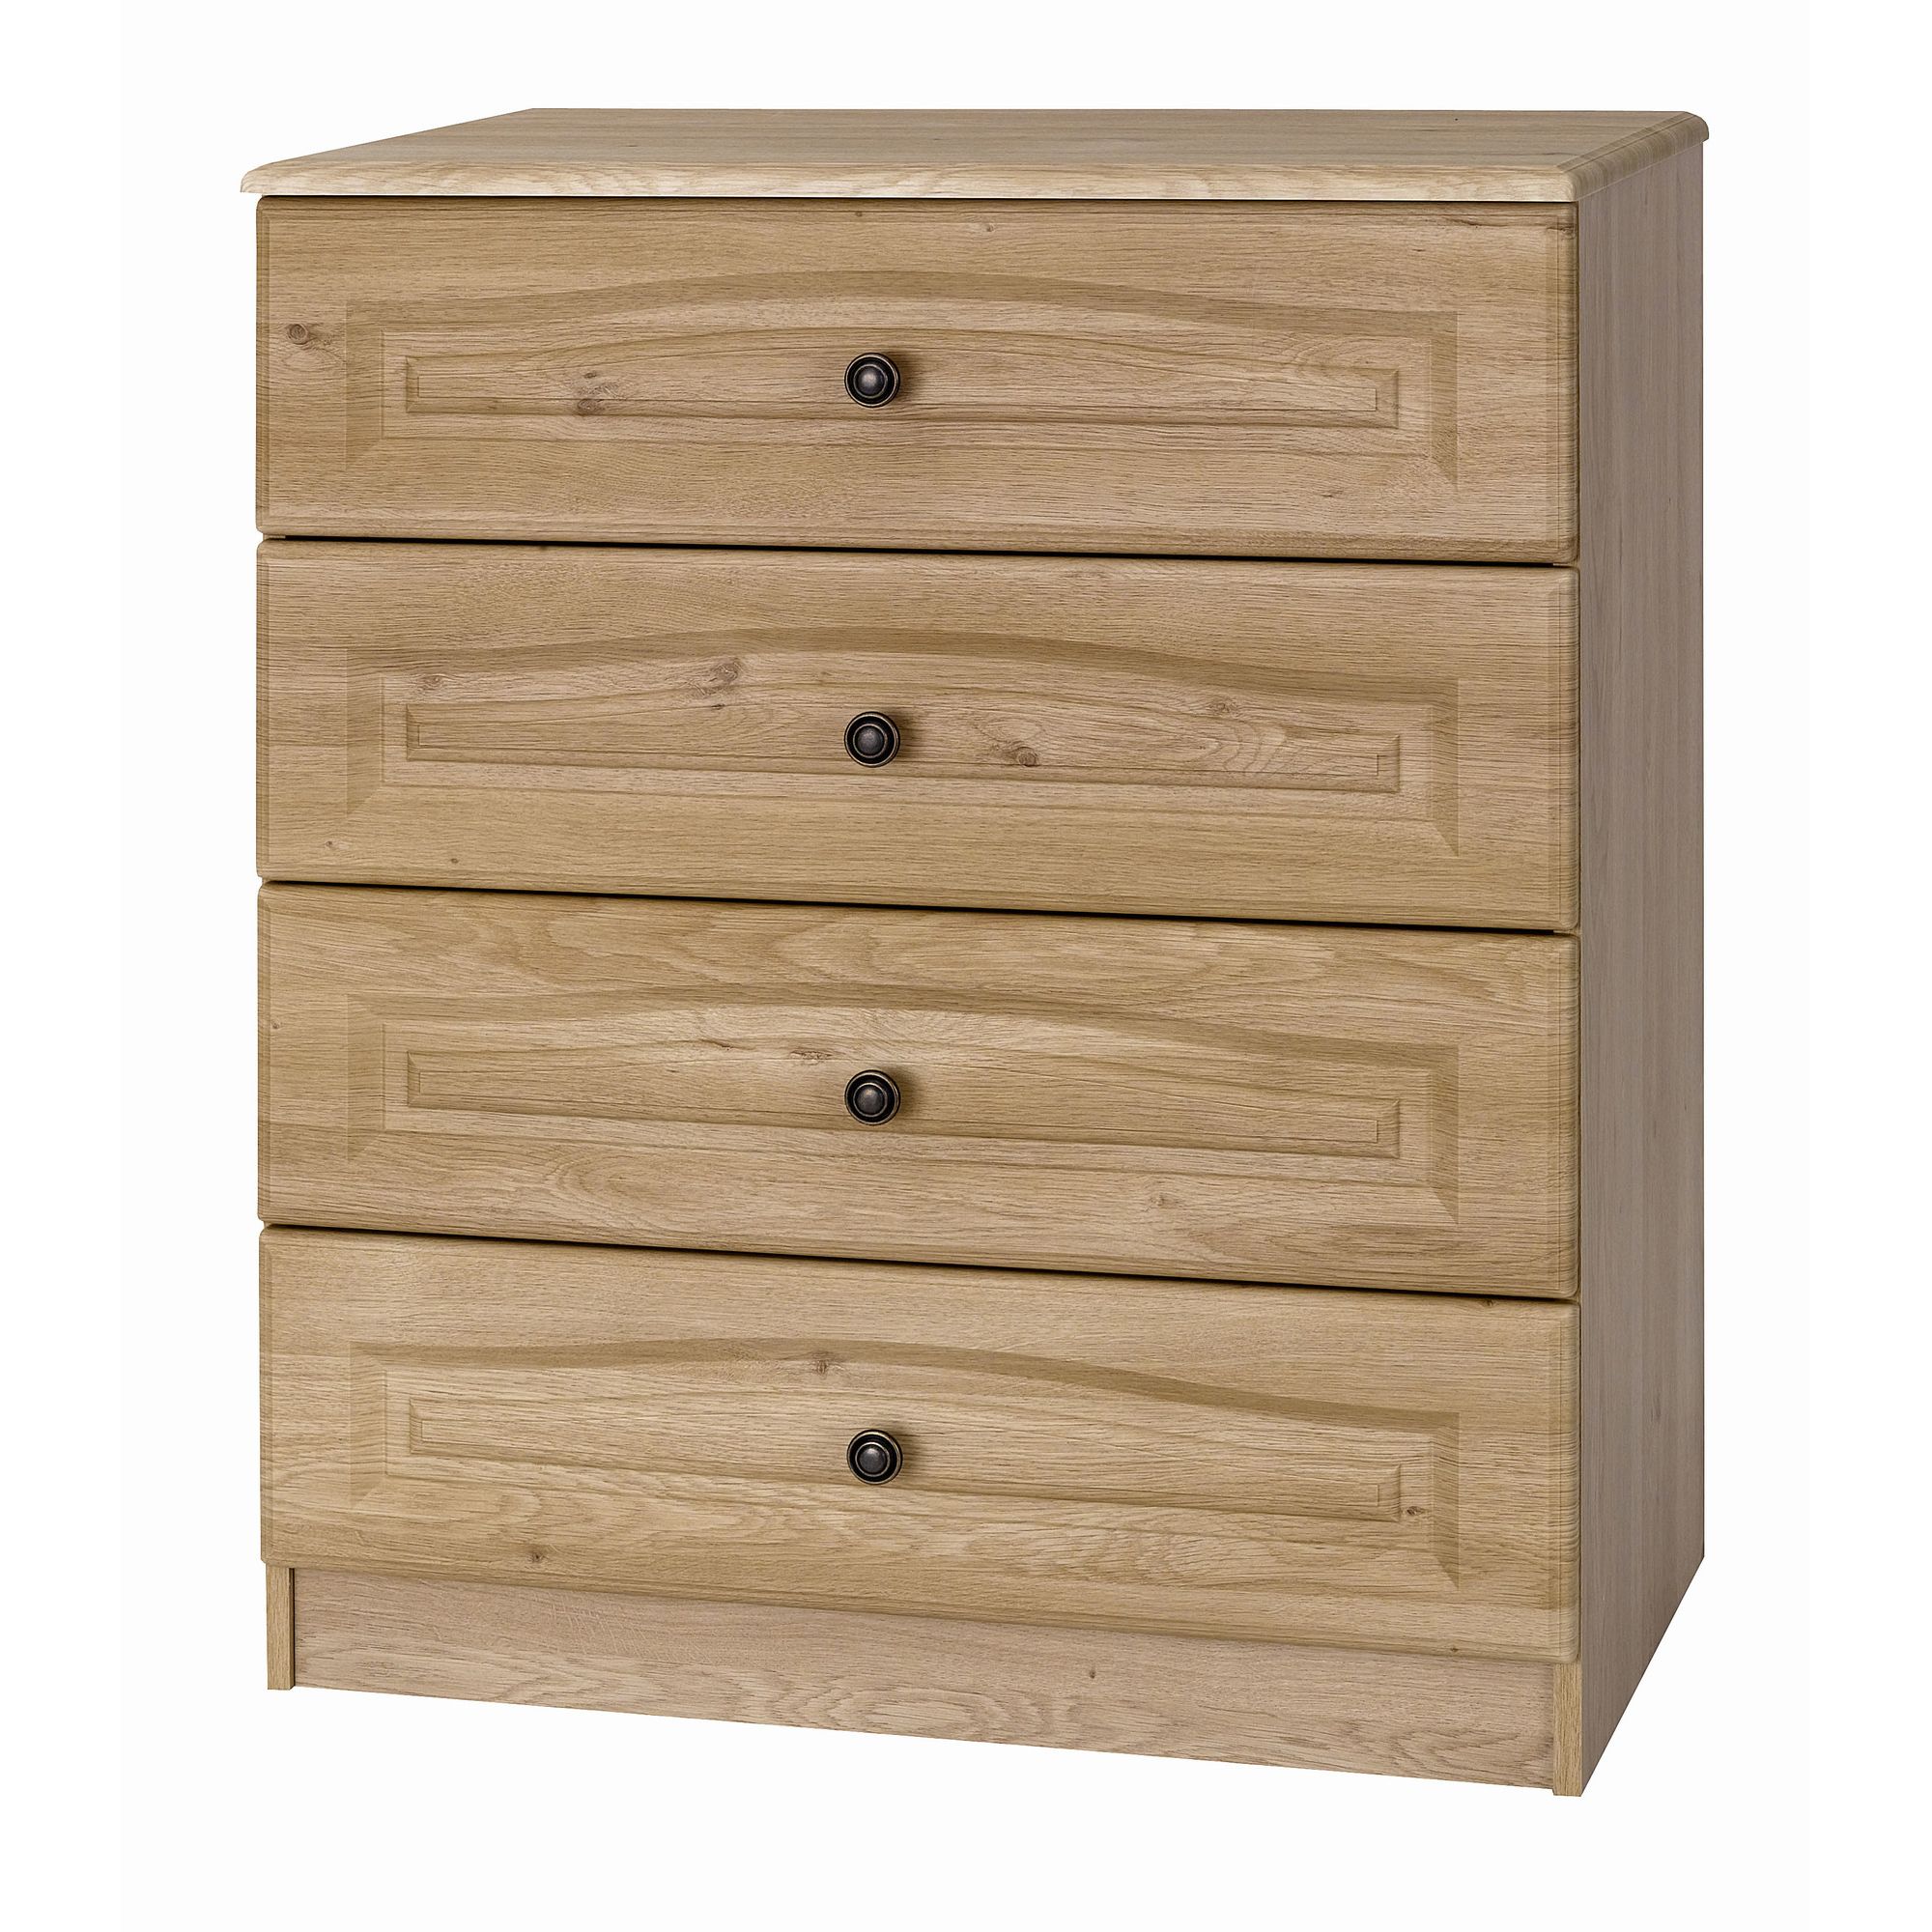 Alto Furniture Visualise Bordeaux Four Drawer Chest in Oak at Tesco Direct